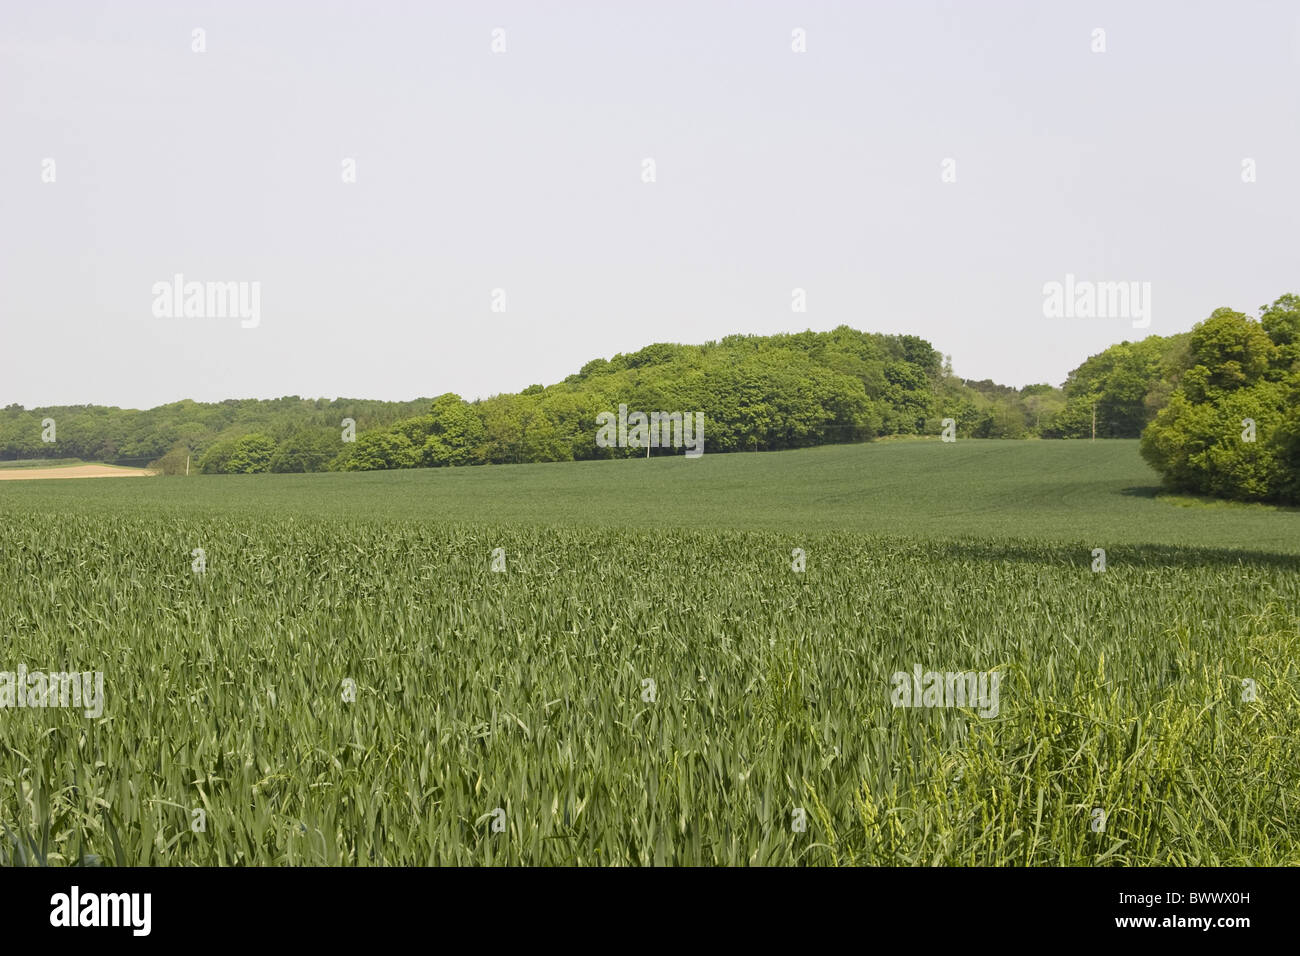 Agriculture Agricultural Agricultures Aestivum Cereals Cereal Landcrop Landcrops Crop Cropping Crops Cultivate Cultivates Stock Photo